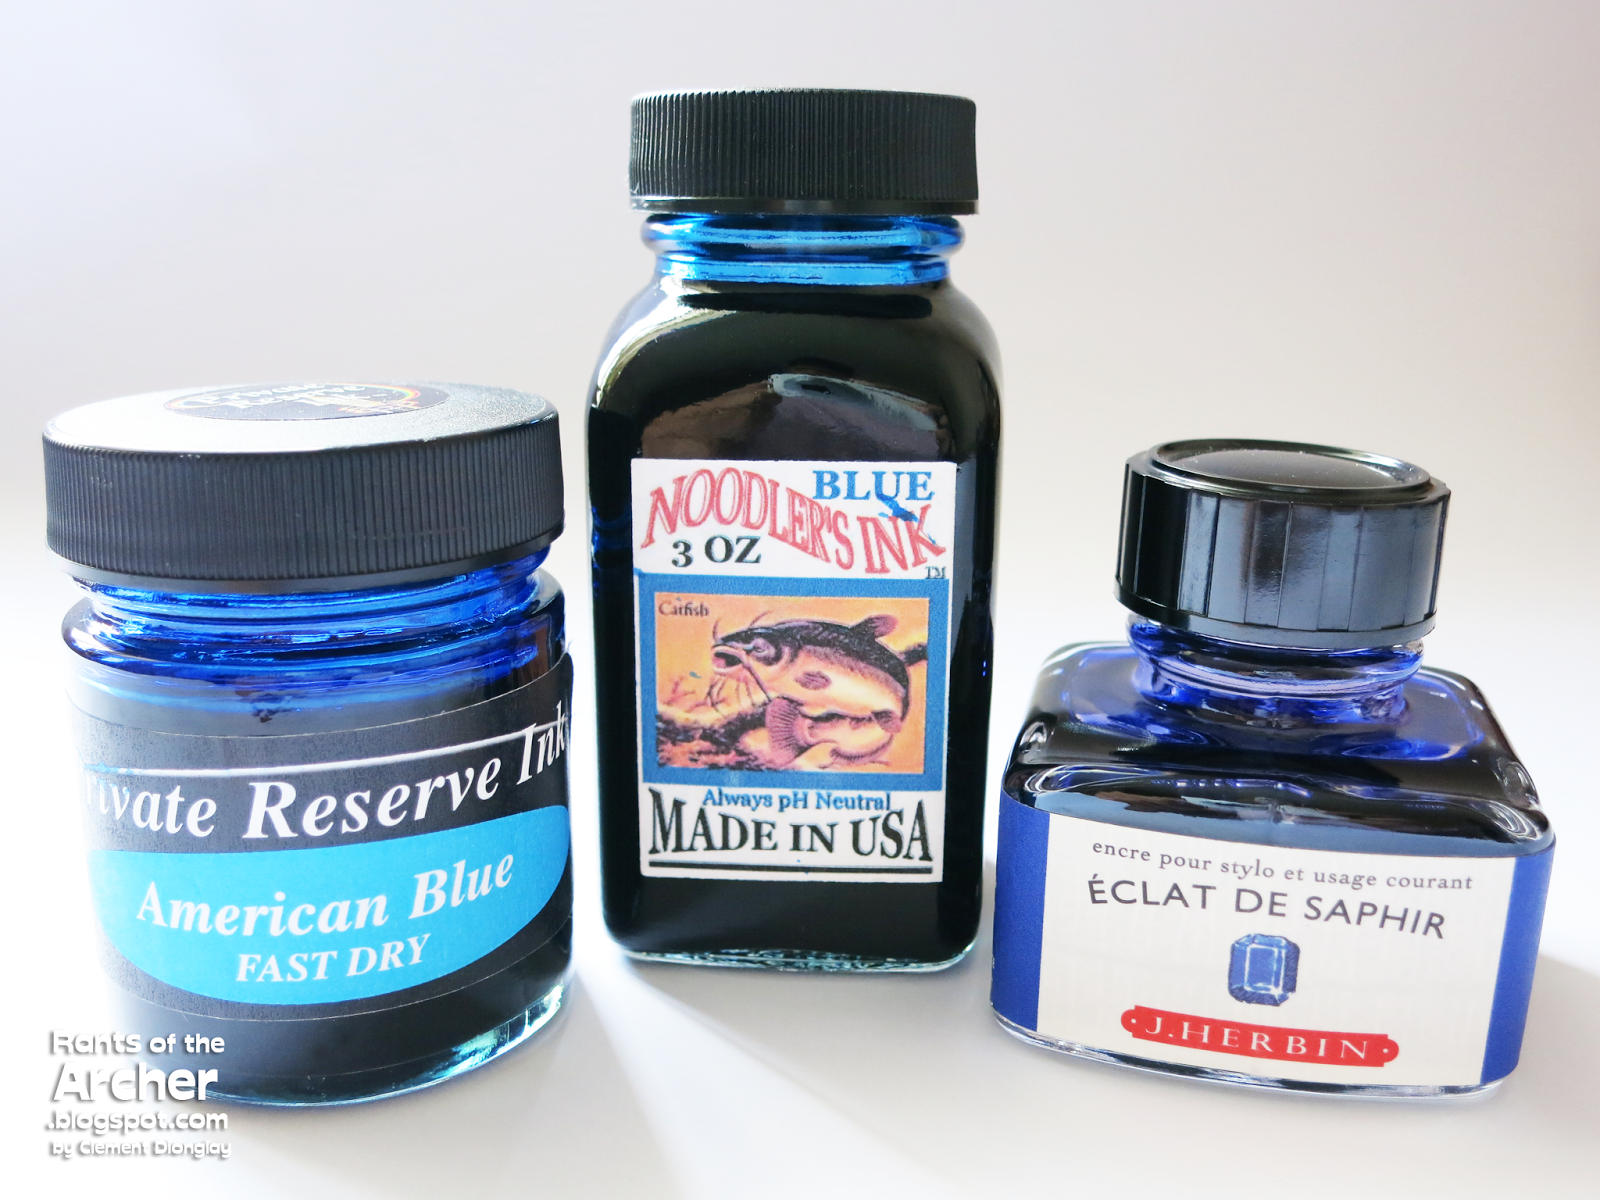 Rants of The Archer: A Comparison of Blue Fountain Pen Inks